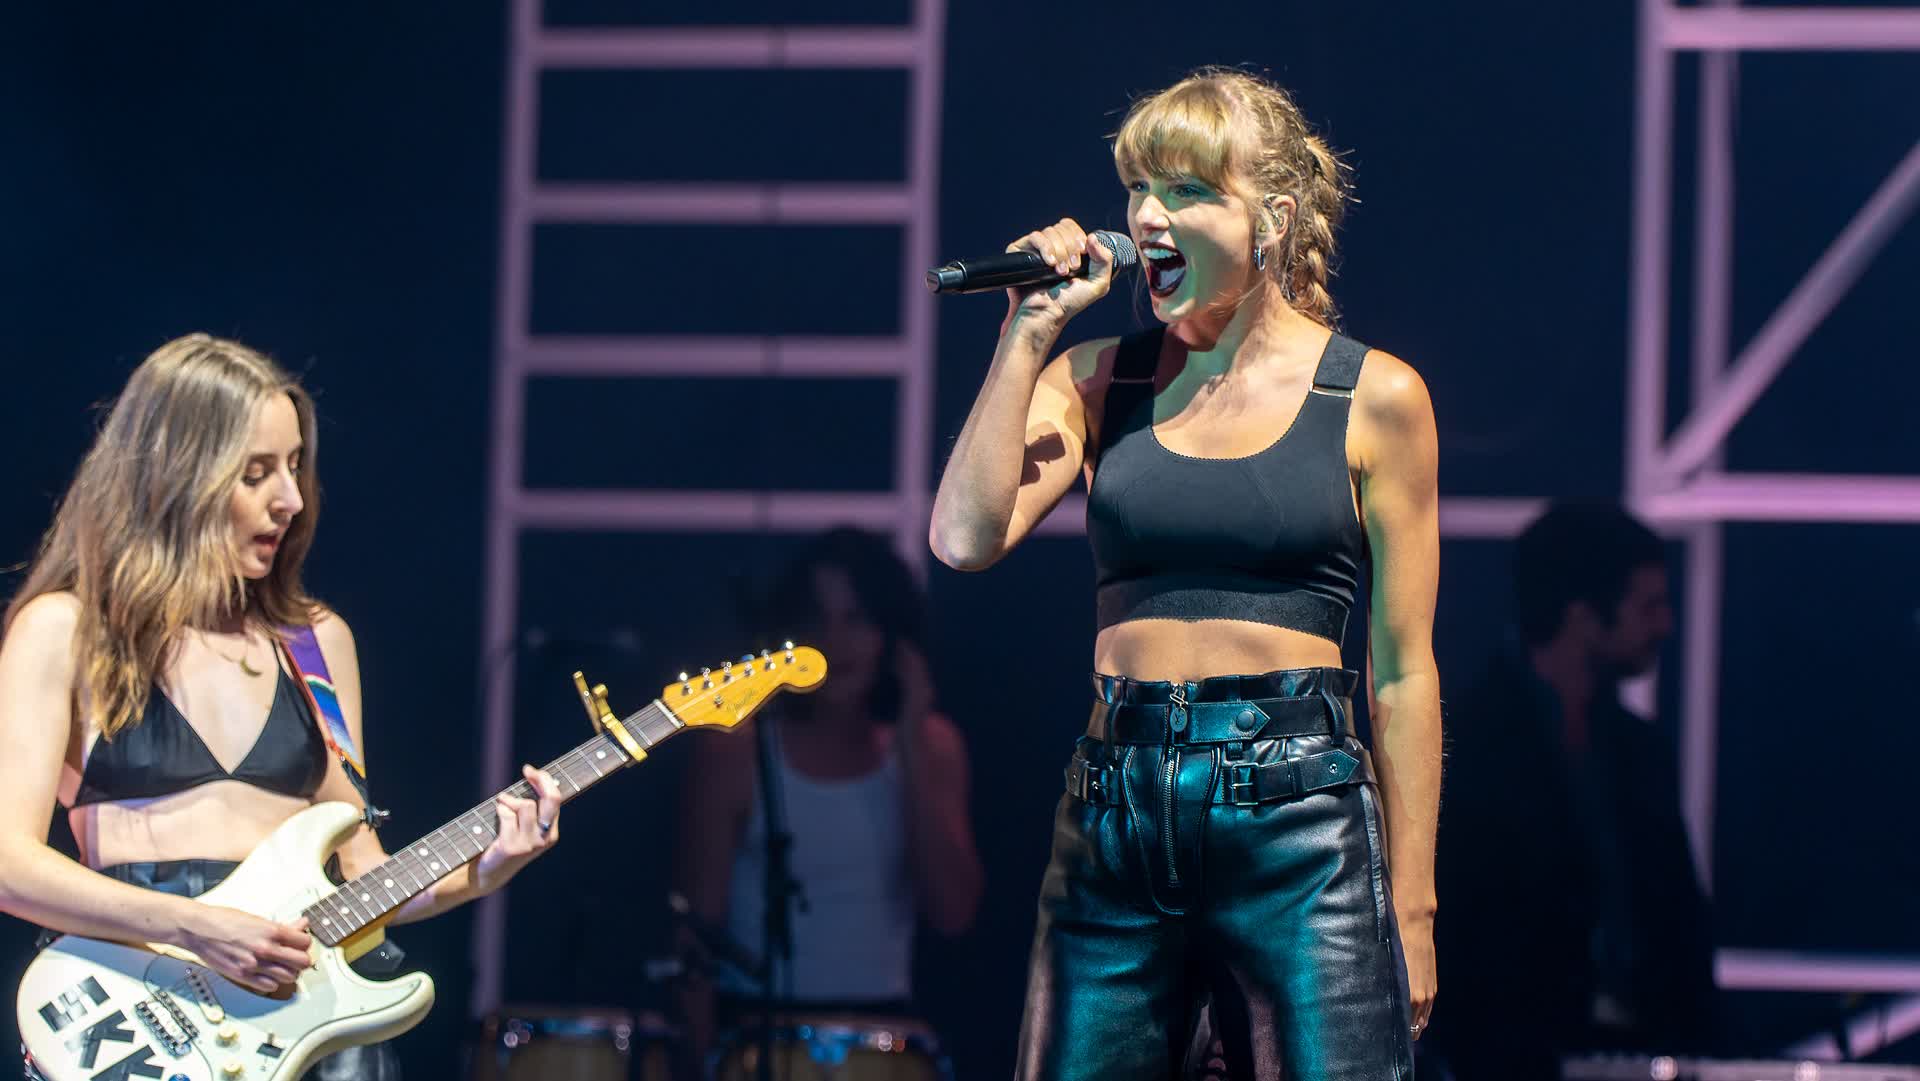 Researchers traced a 2.3 magnitude Seattle earthquake's epicenter to a Taylor Swift concert